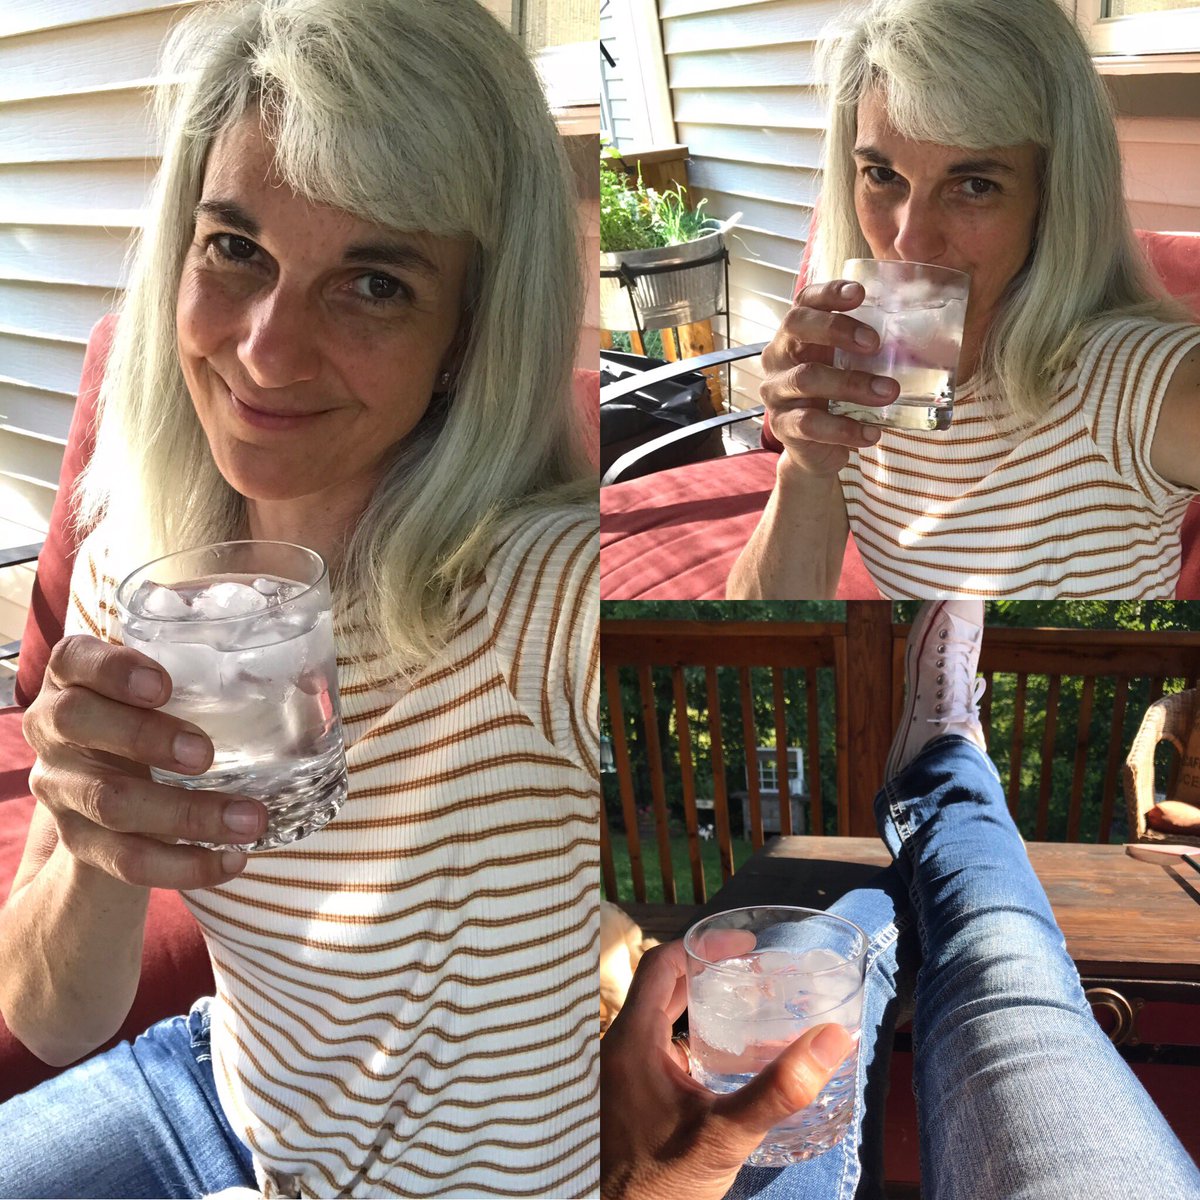 Perfect way to end the day—gin and tonic on the deck. And what a day it’s been. Got to work with my first client today, who is amazing by the way. #firstclient #ncsfcertifiedpersonaltrainer #celebratorydrank